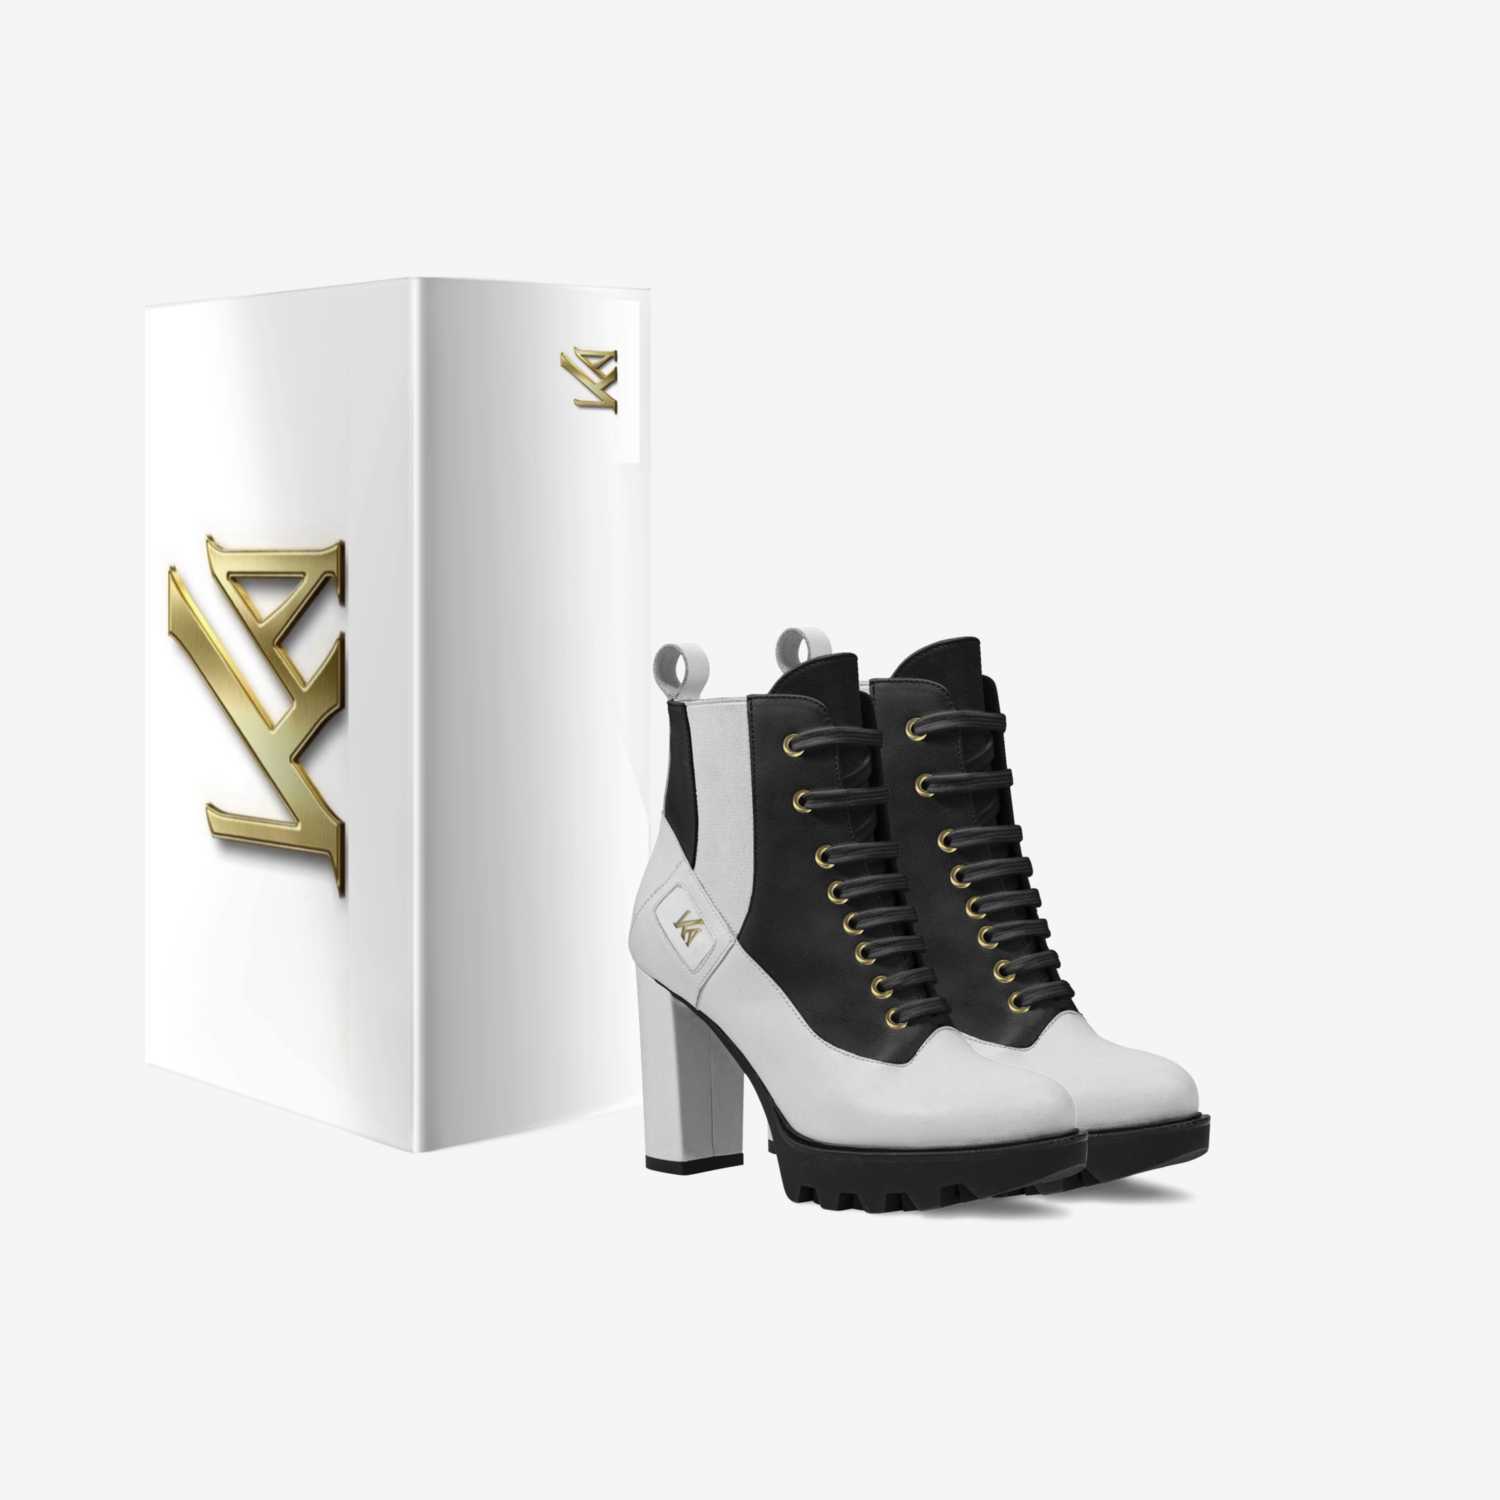 Kay Allure custom made in Italy shoes by Khadizah Amos | Box view